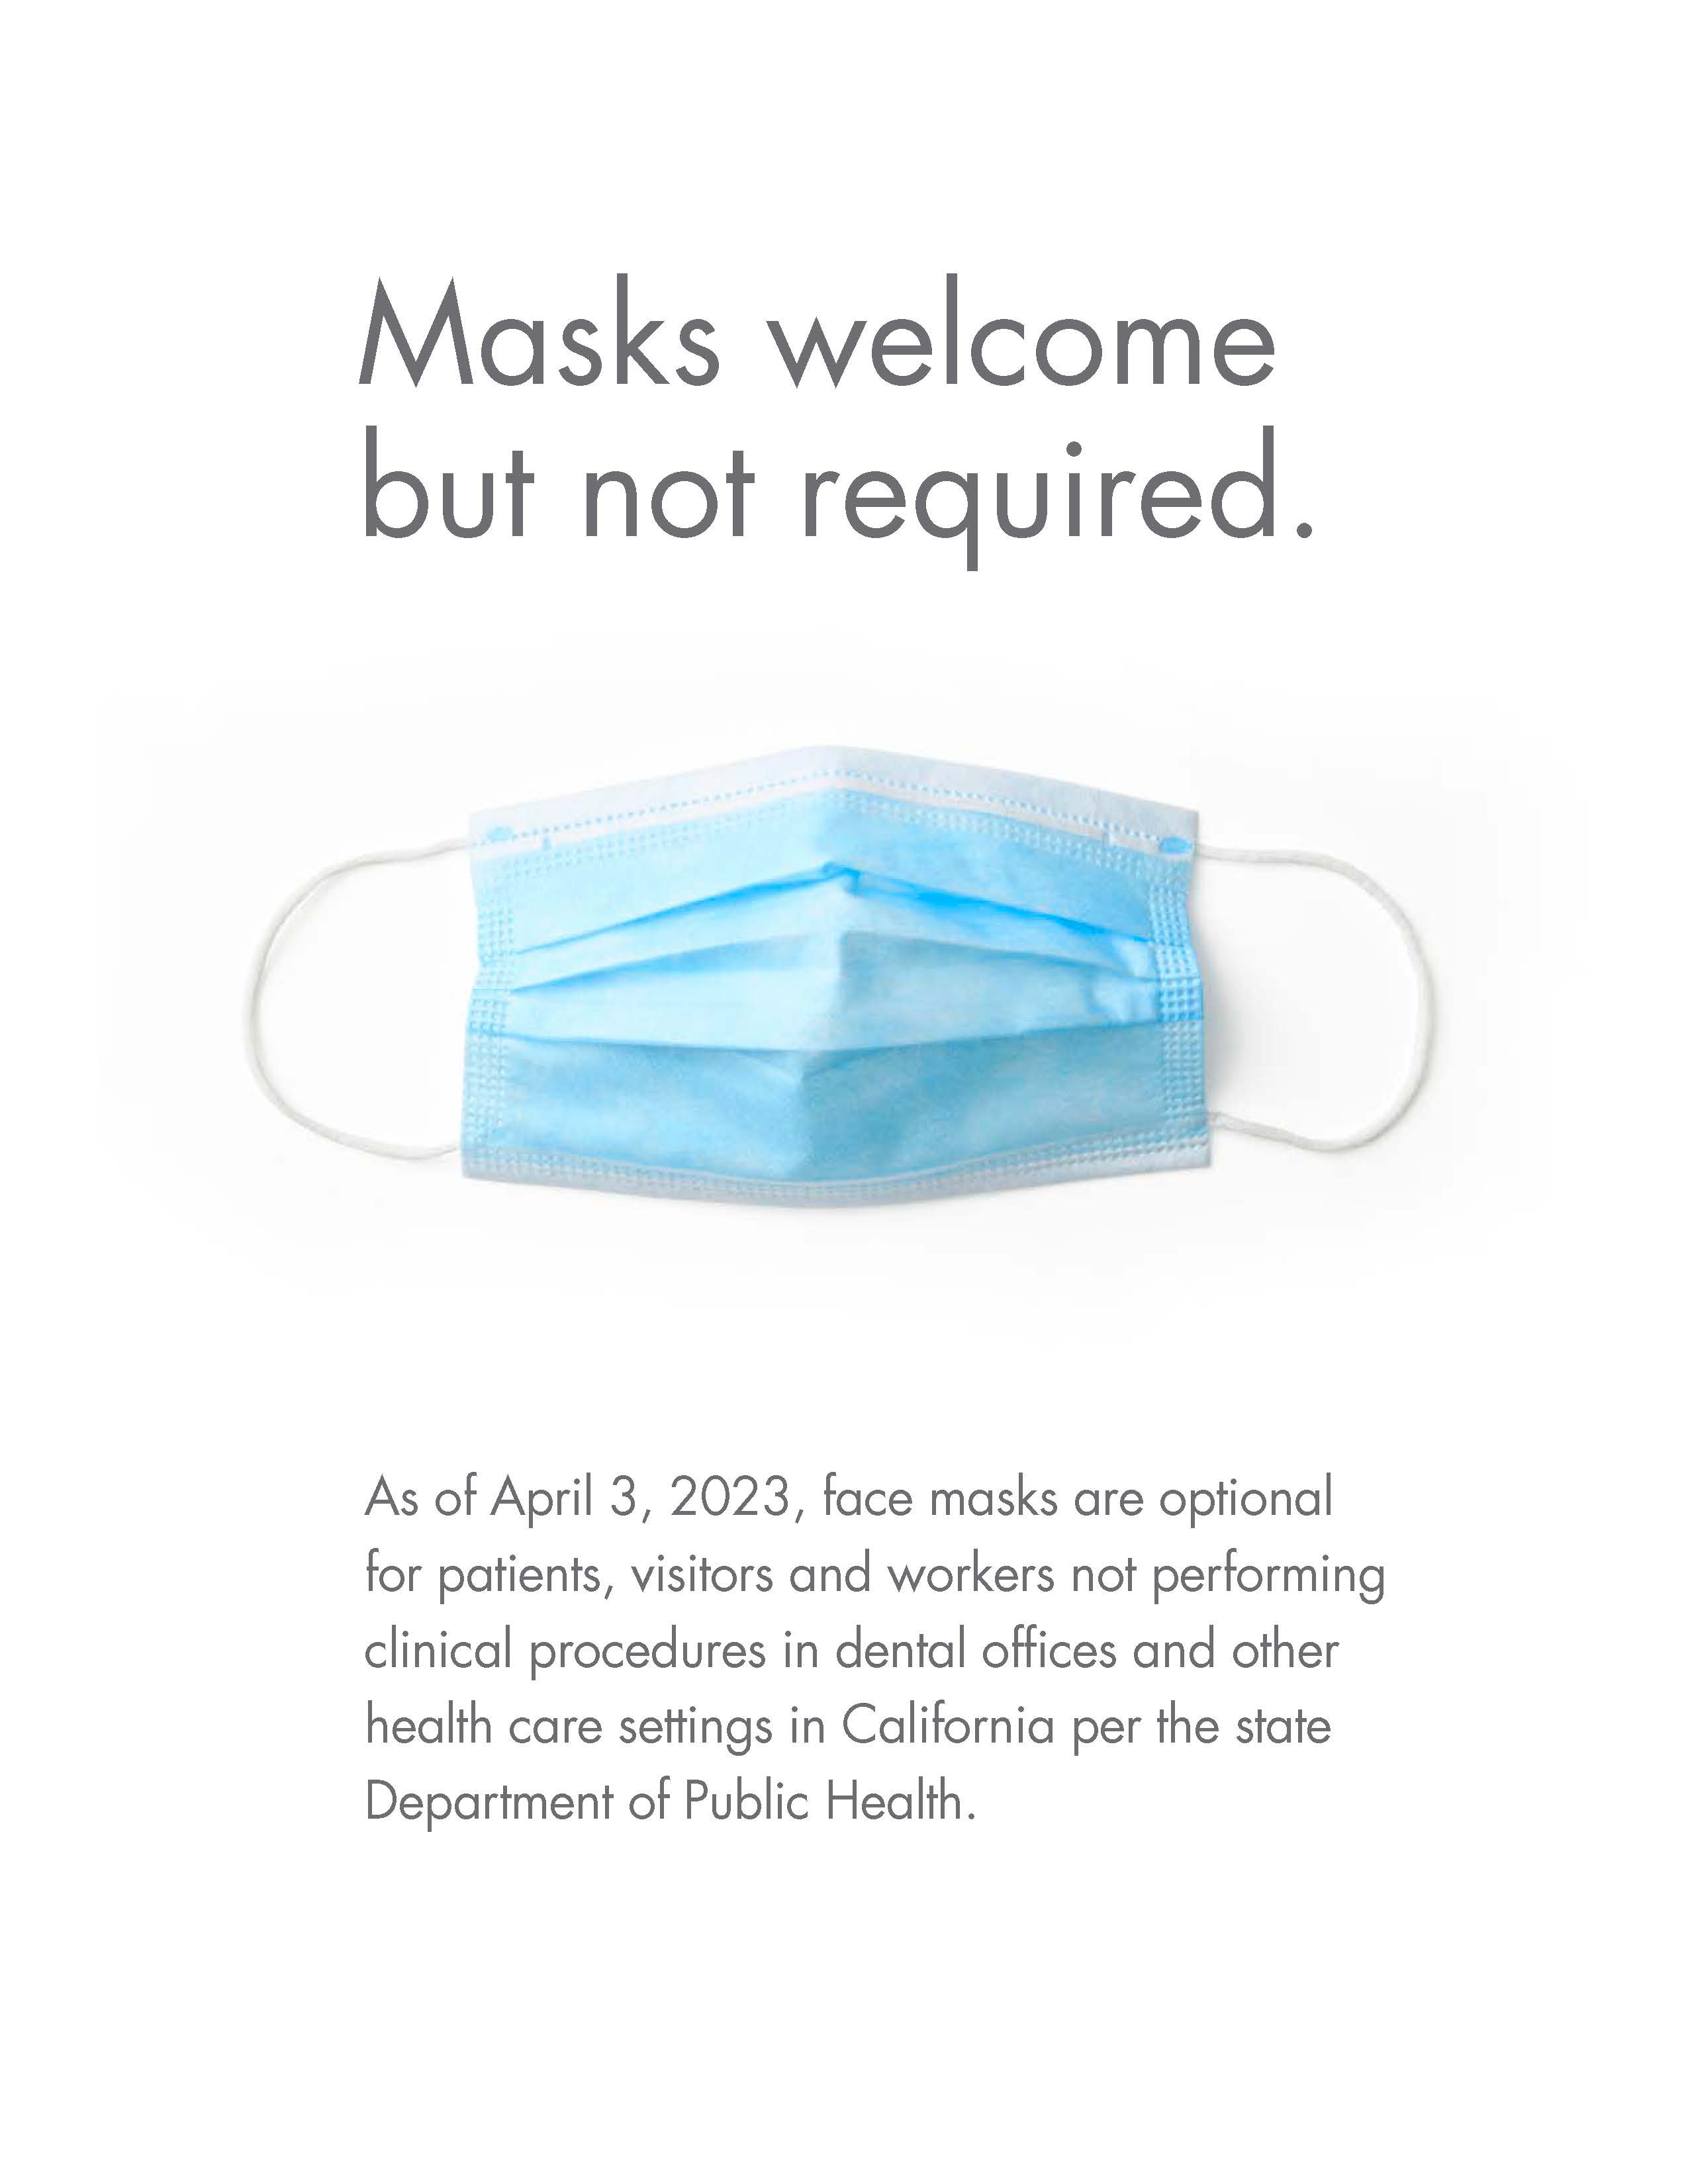 mask not required